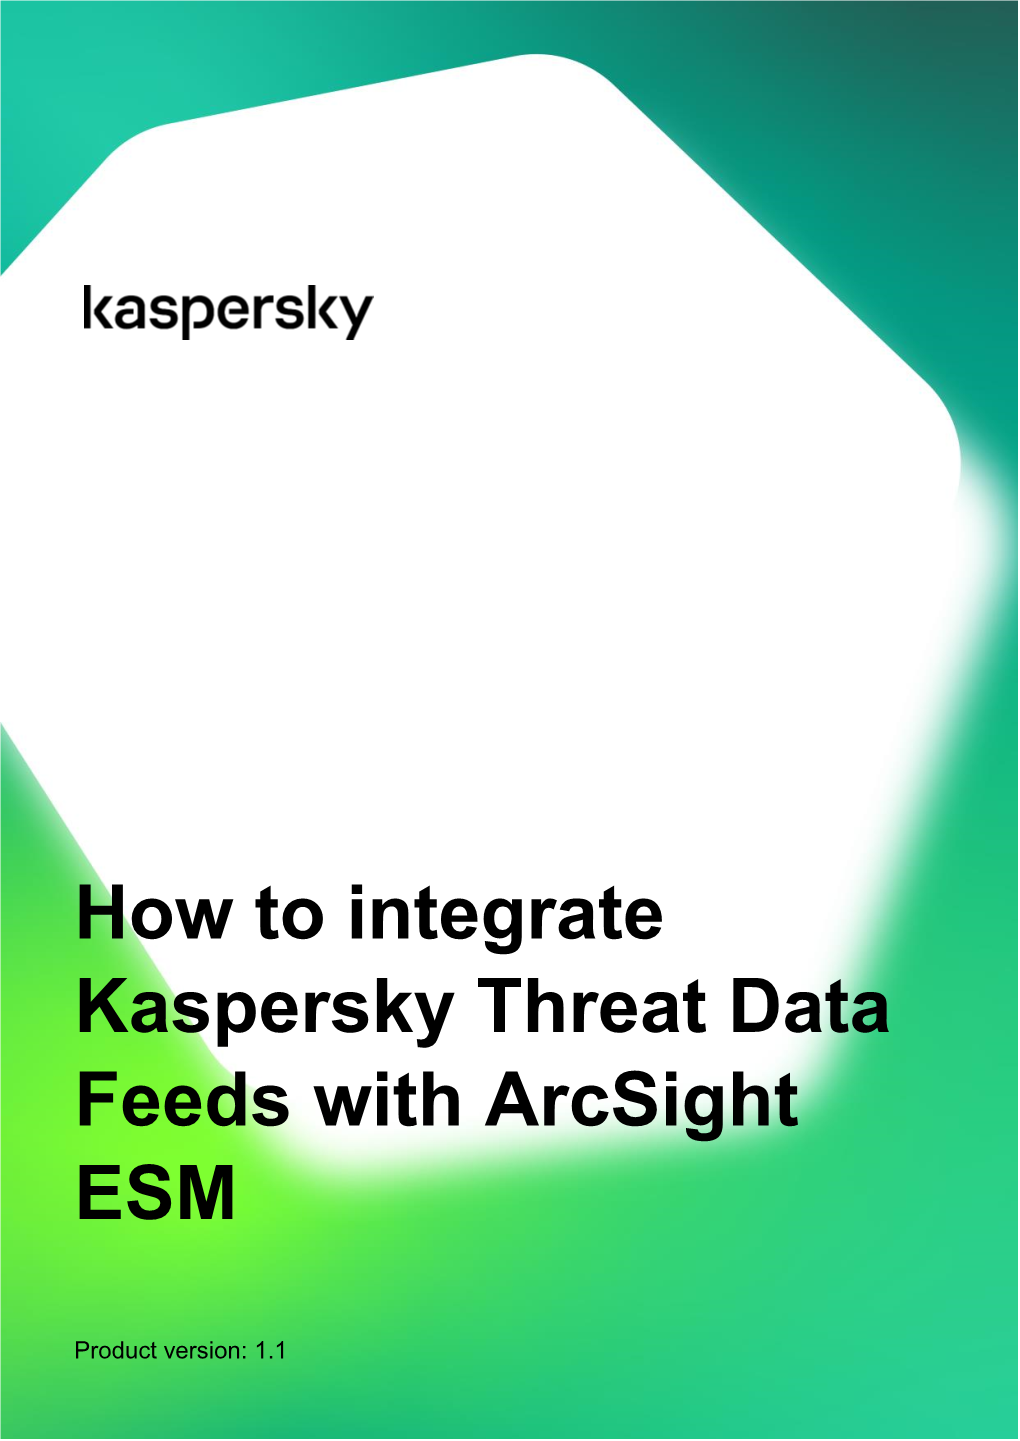 How to Integrate Kaspersky Threat Data Feeds with Arcsight ESM